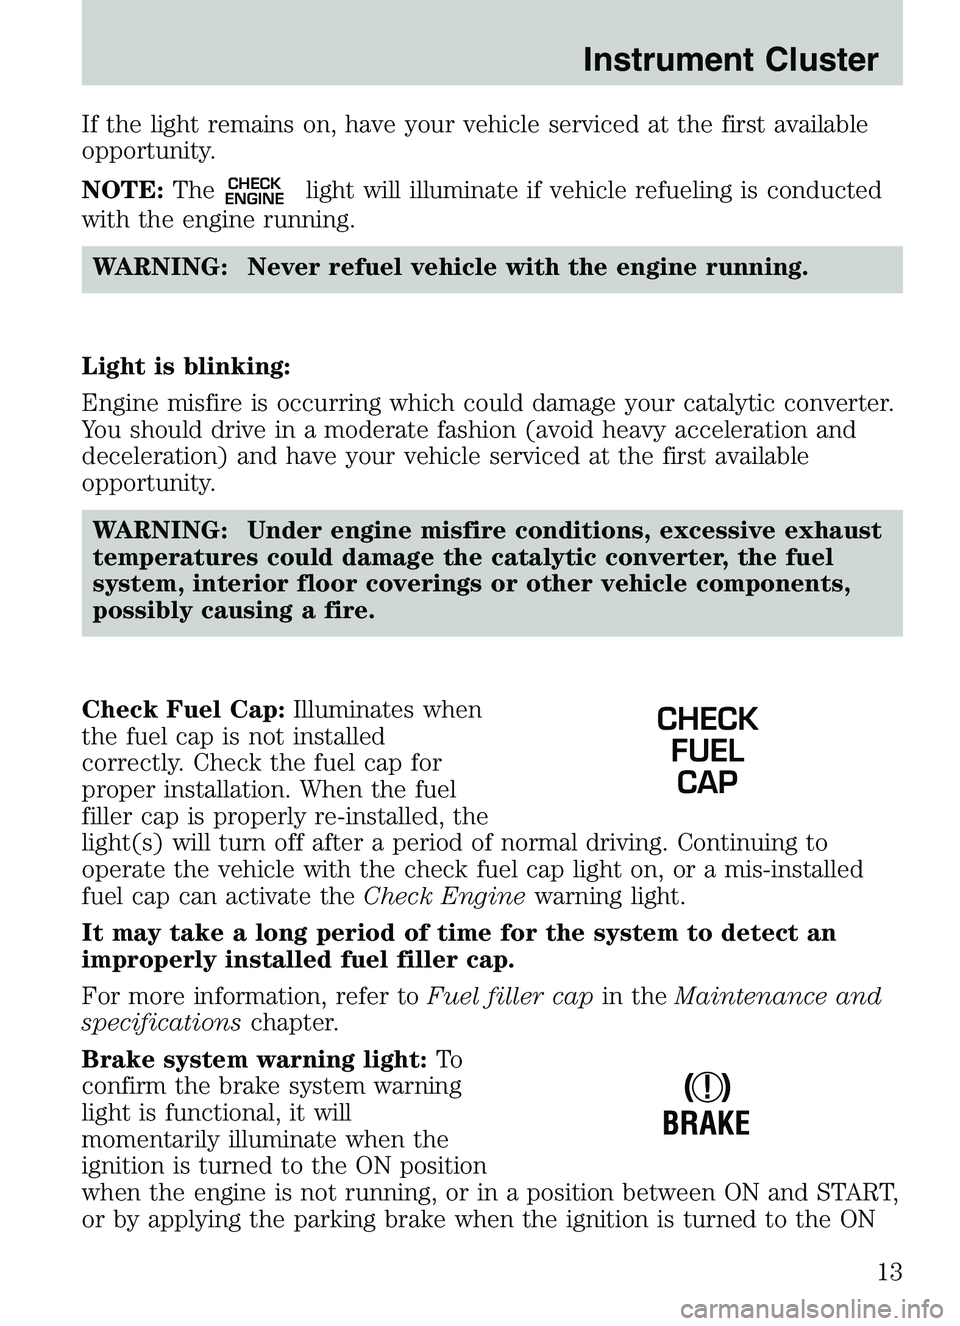 MAZDA MODEL B4000 4WD 2003  Owners Manual If the light remains on, have your vehicle serviced at the first available
opportunity.
NOTE:The
CHECK
ENGINElight will illuminate if vehicle refueling is conducted
with the engine running.
WARNING: N